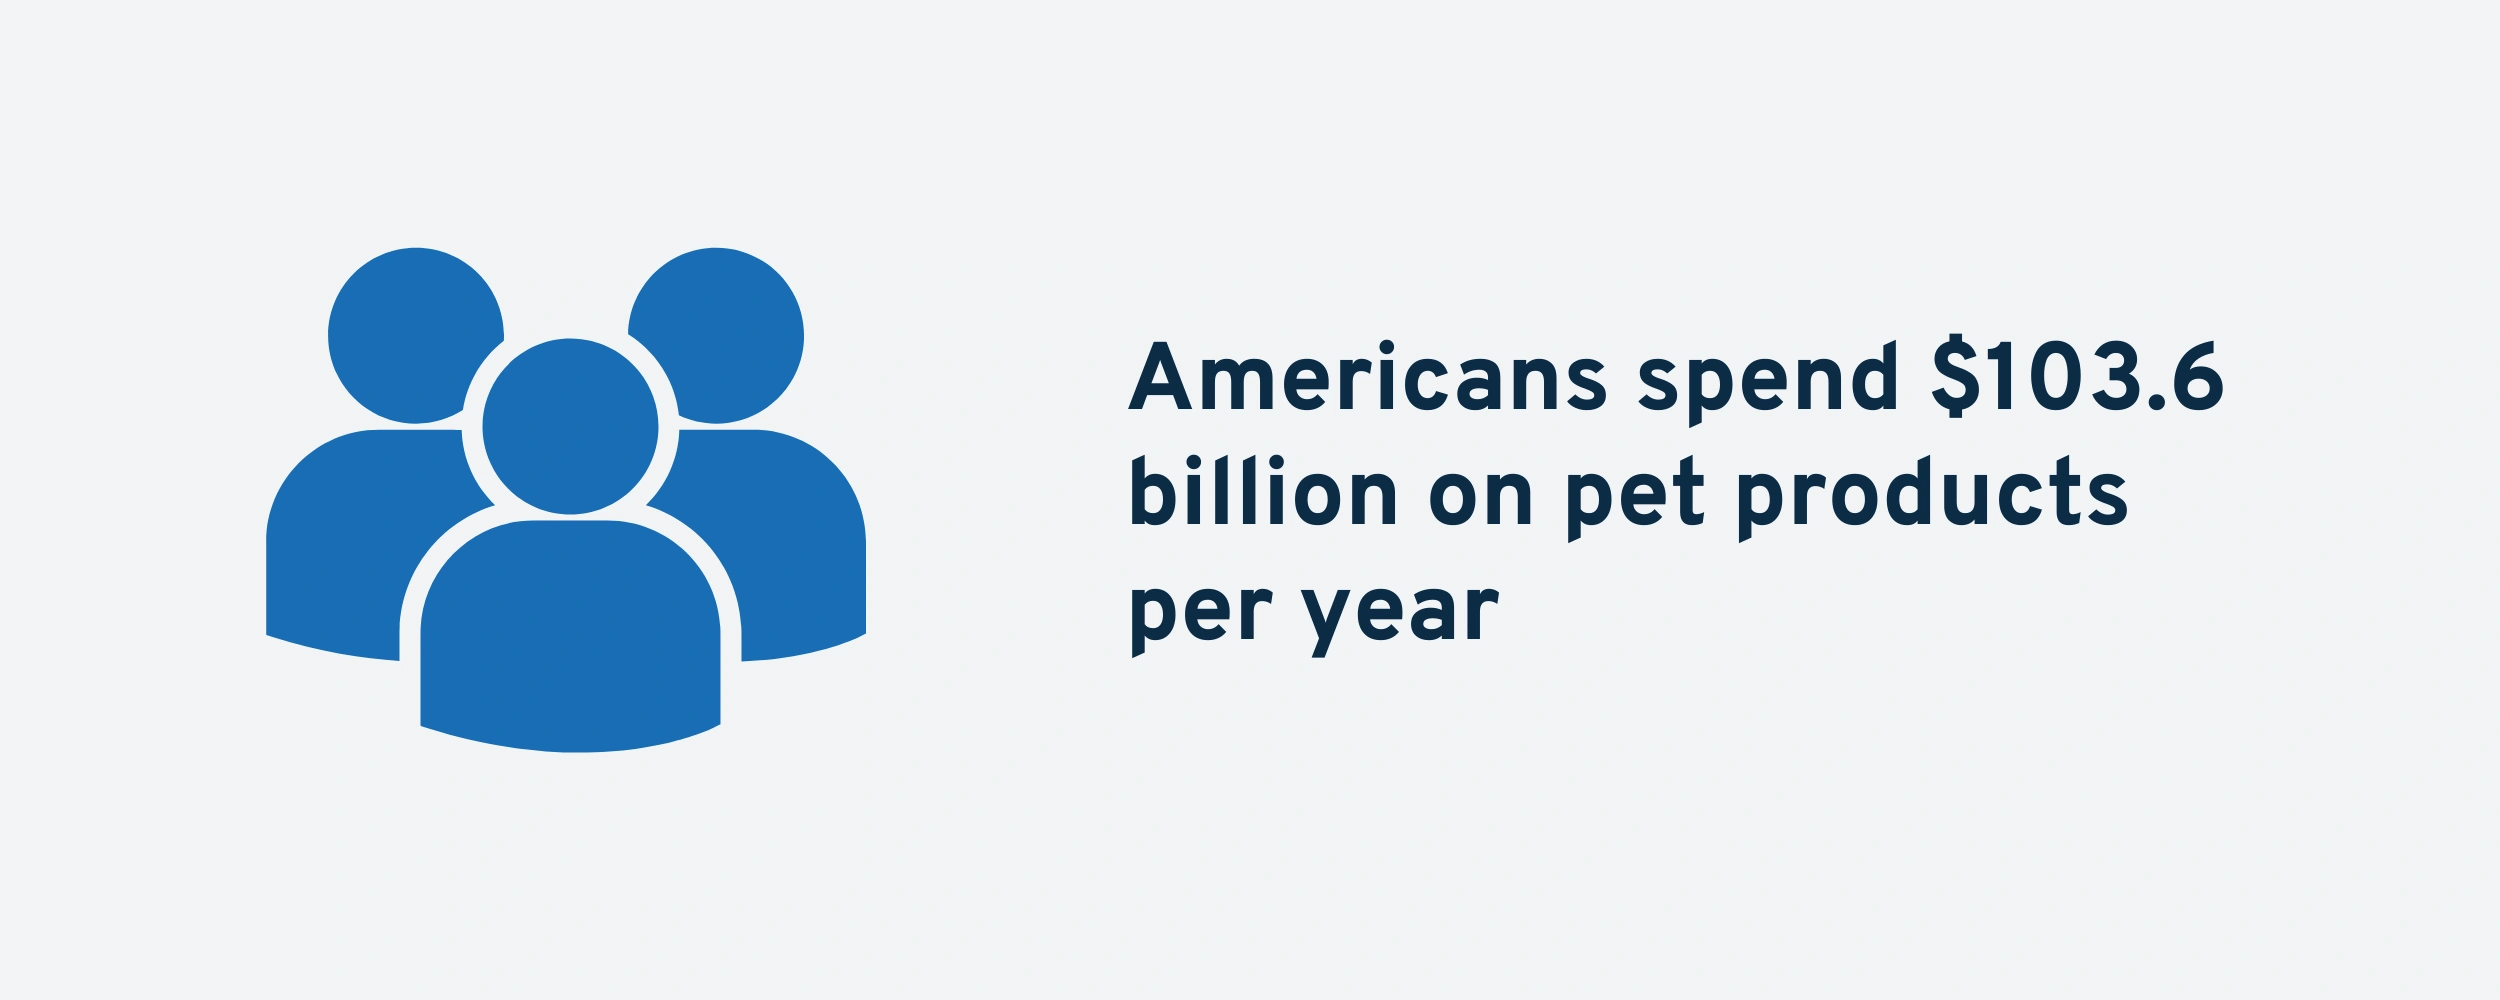 pet-products-spending-min.png